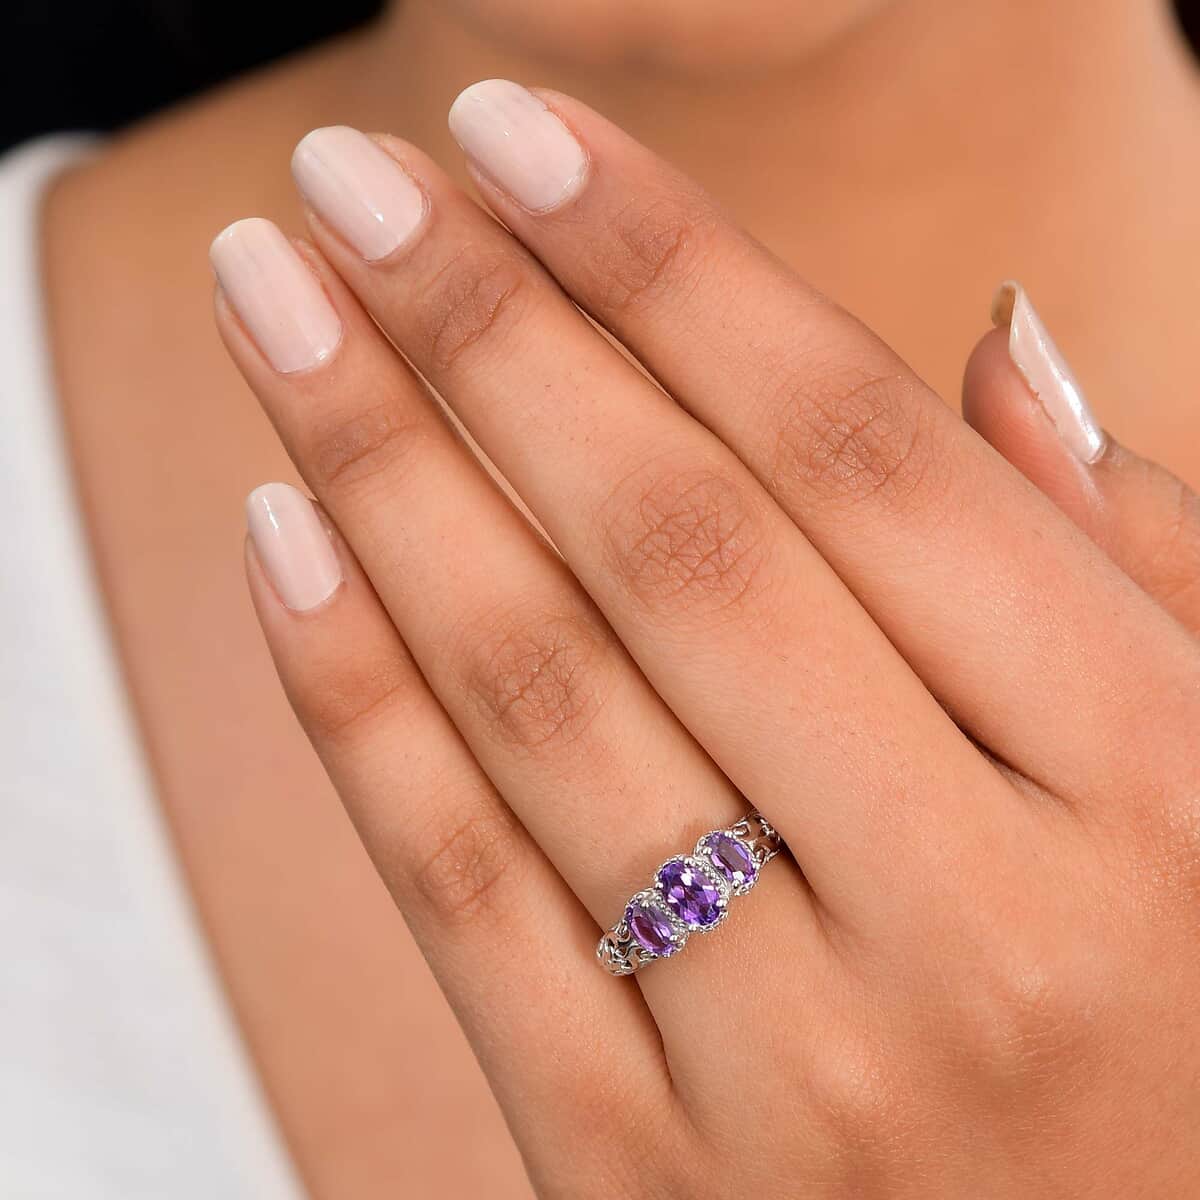 Amethyst Ring, 3 Stone Amethyst Ring, Trilogy Ring, Sterling Silver Ring, Birthstone Jewelry, Amethyst 3 Stone Ring 0.85 ctw (Size 10.0) image number 3